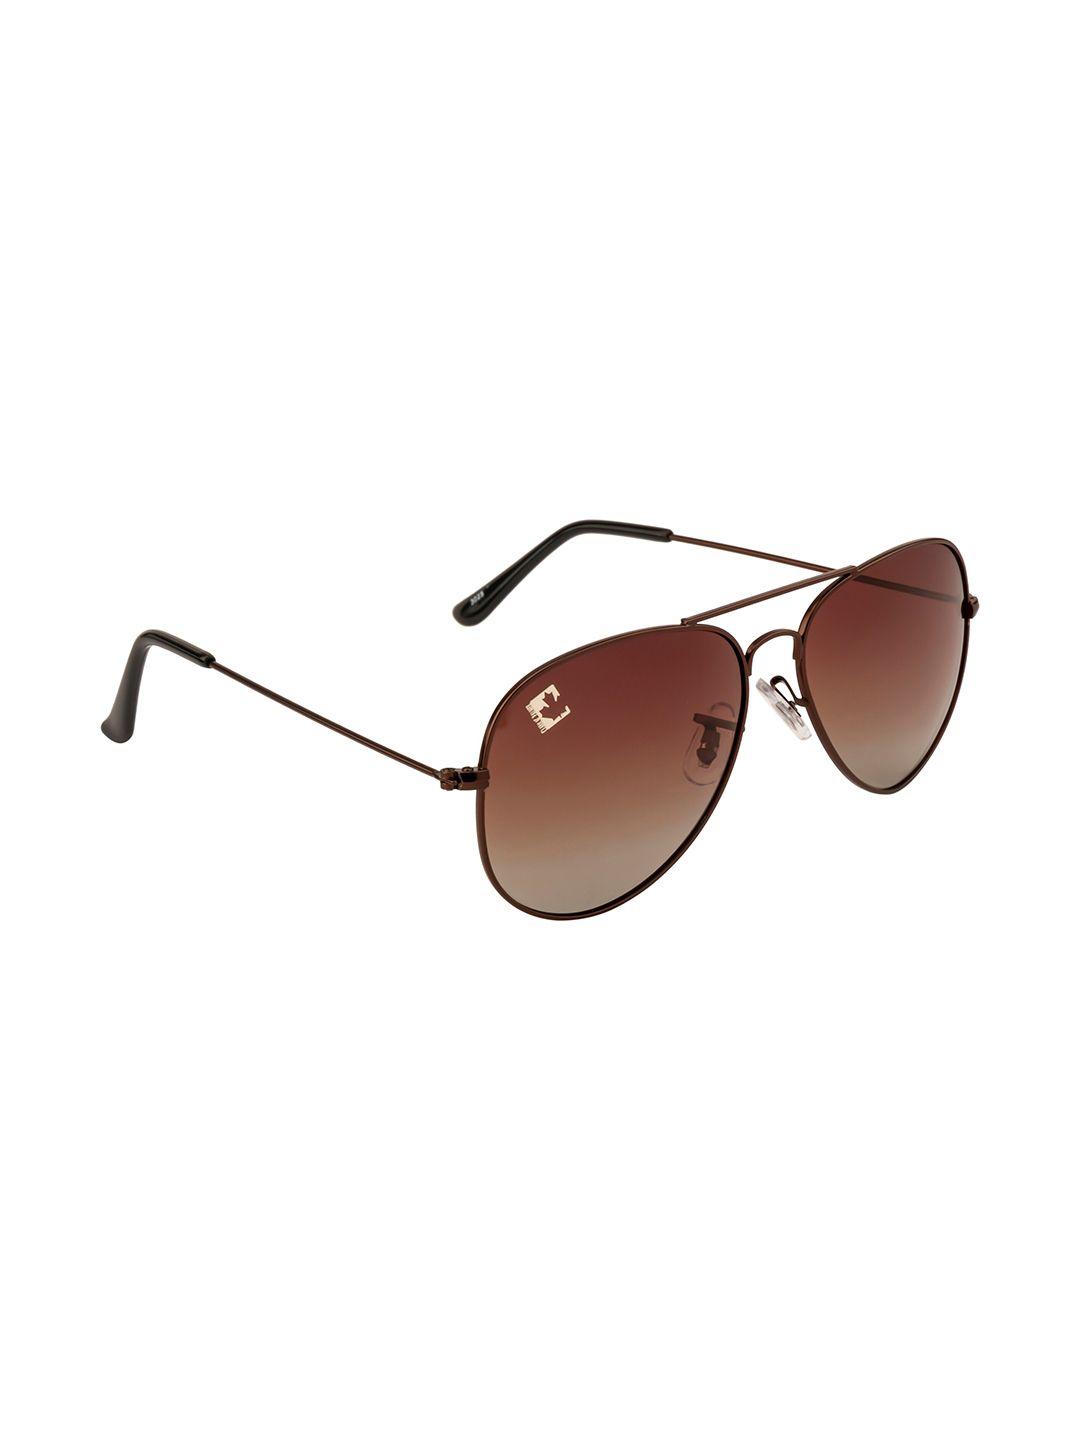 clark n palmer unisex brown lens & brown aviator sunglasses with polarised and uv protected lens